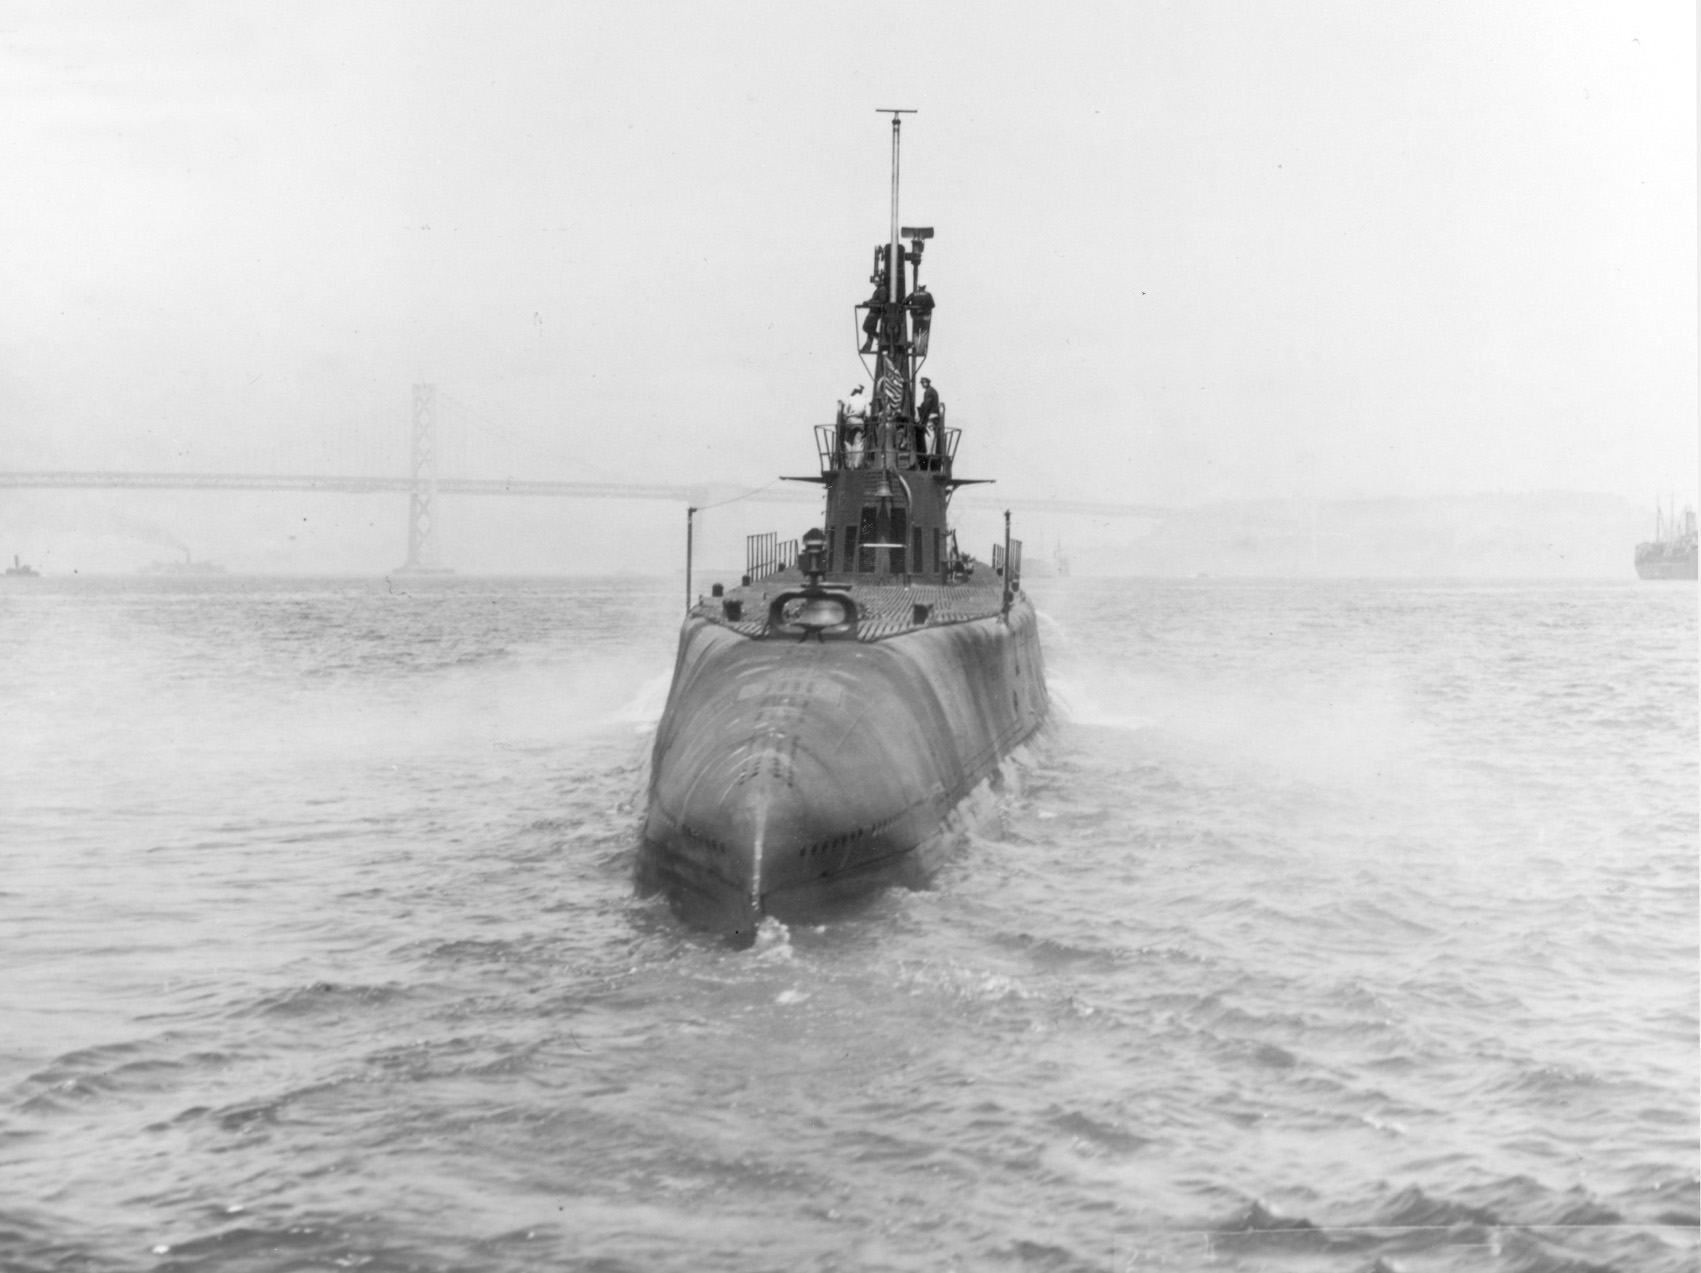 Sculpin maneuvers in San Fancisco Bay on May 1, 1943, following an overhaul.